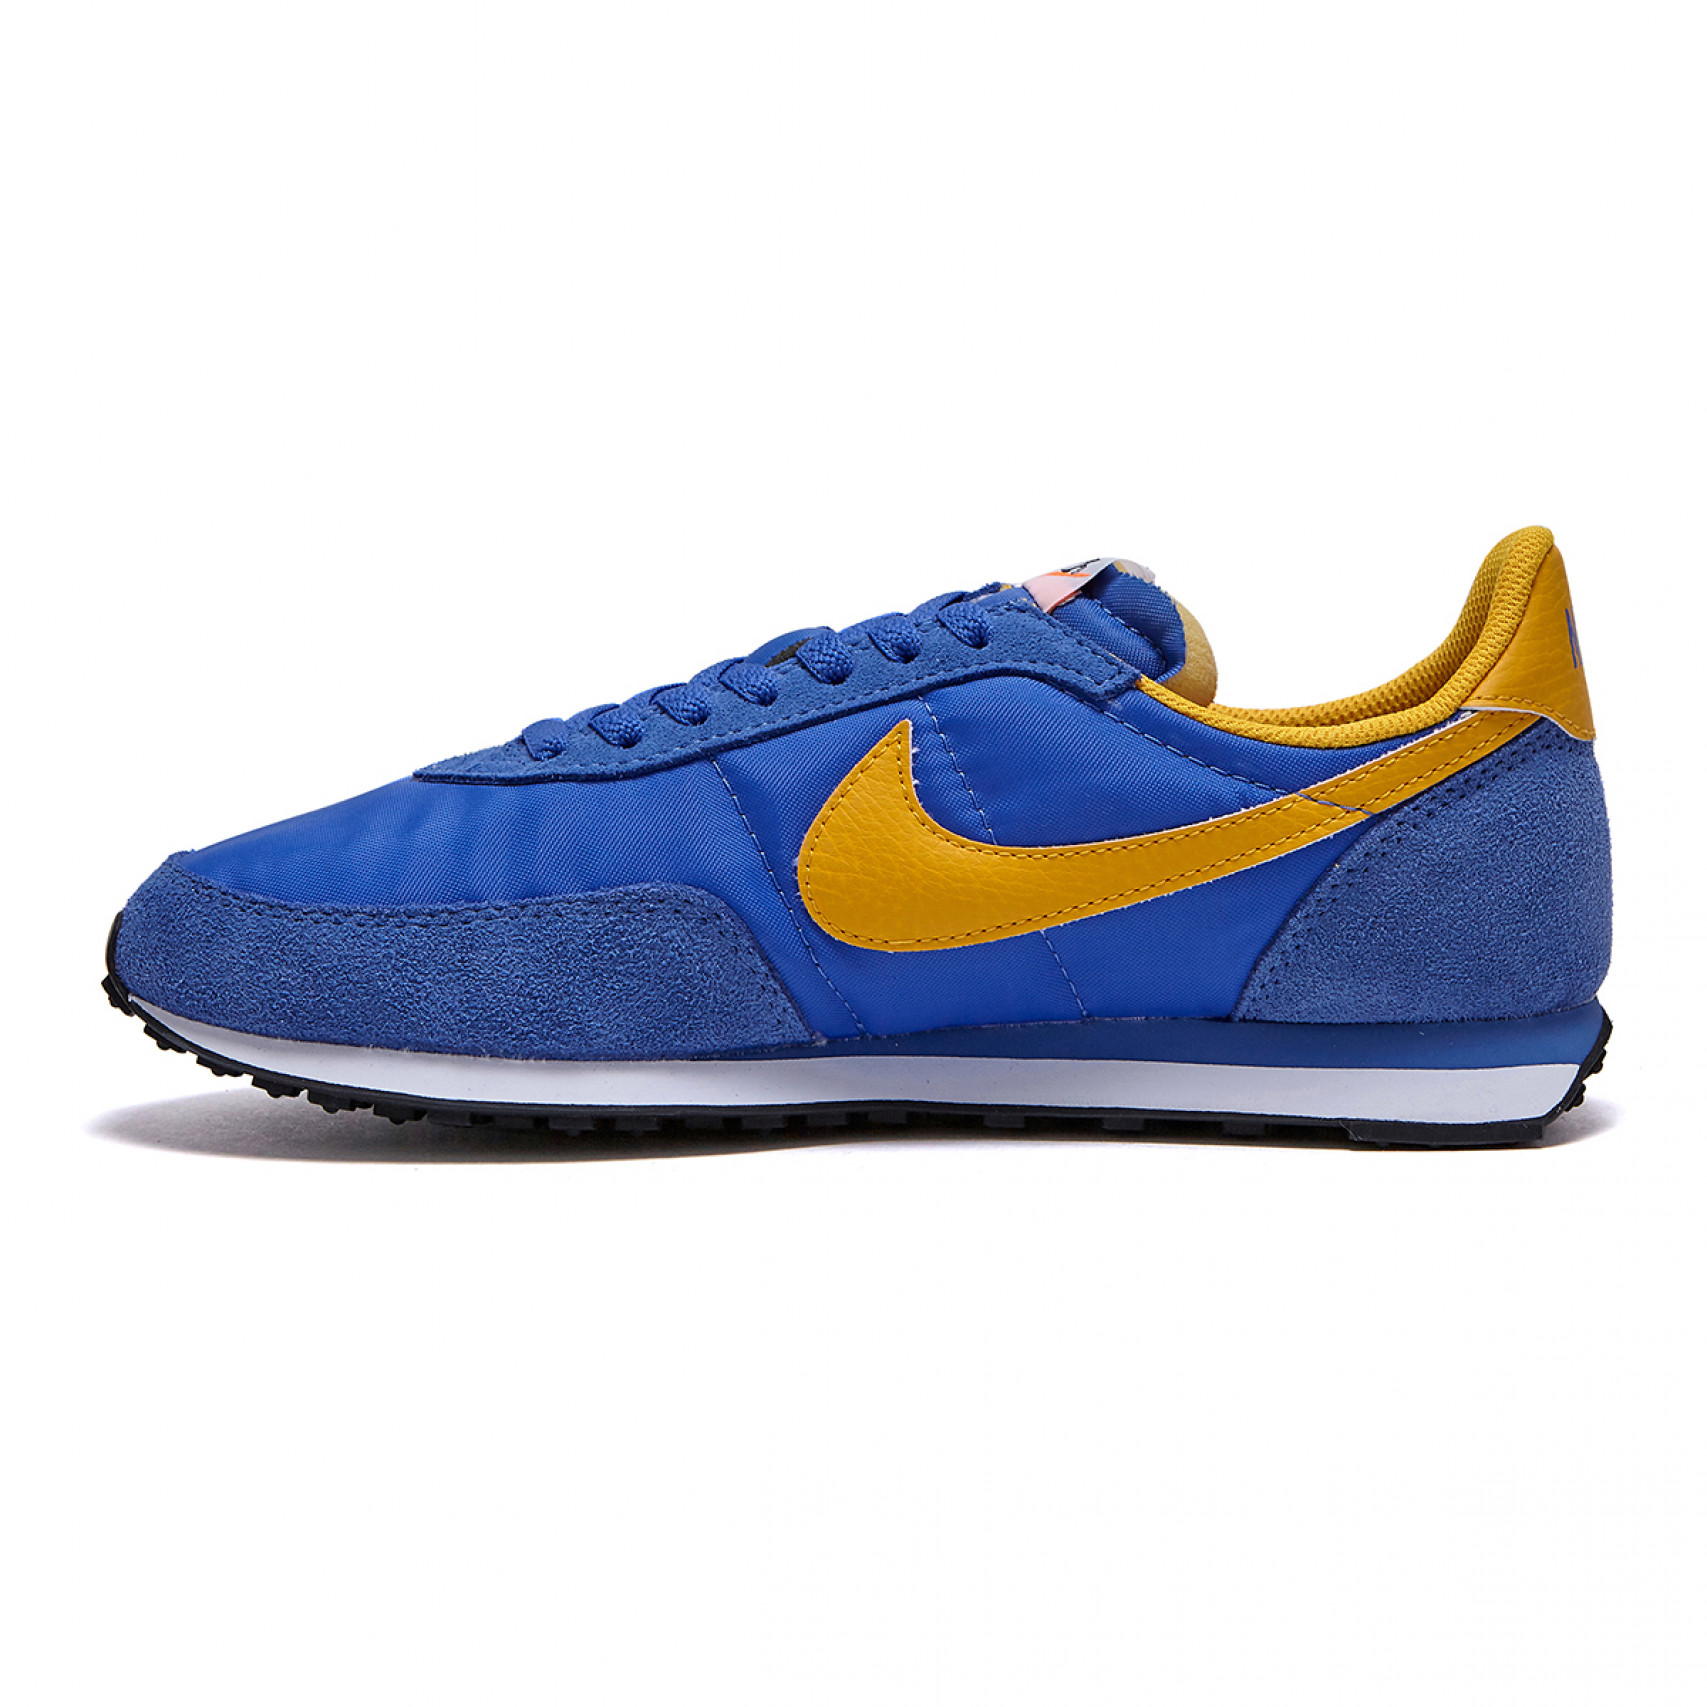 NIKE WAFFLE TRAINER 2 / DH1349-402